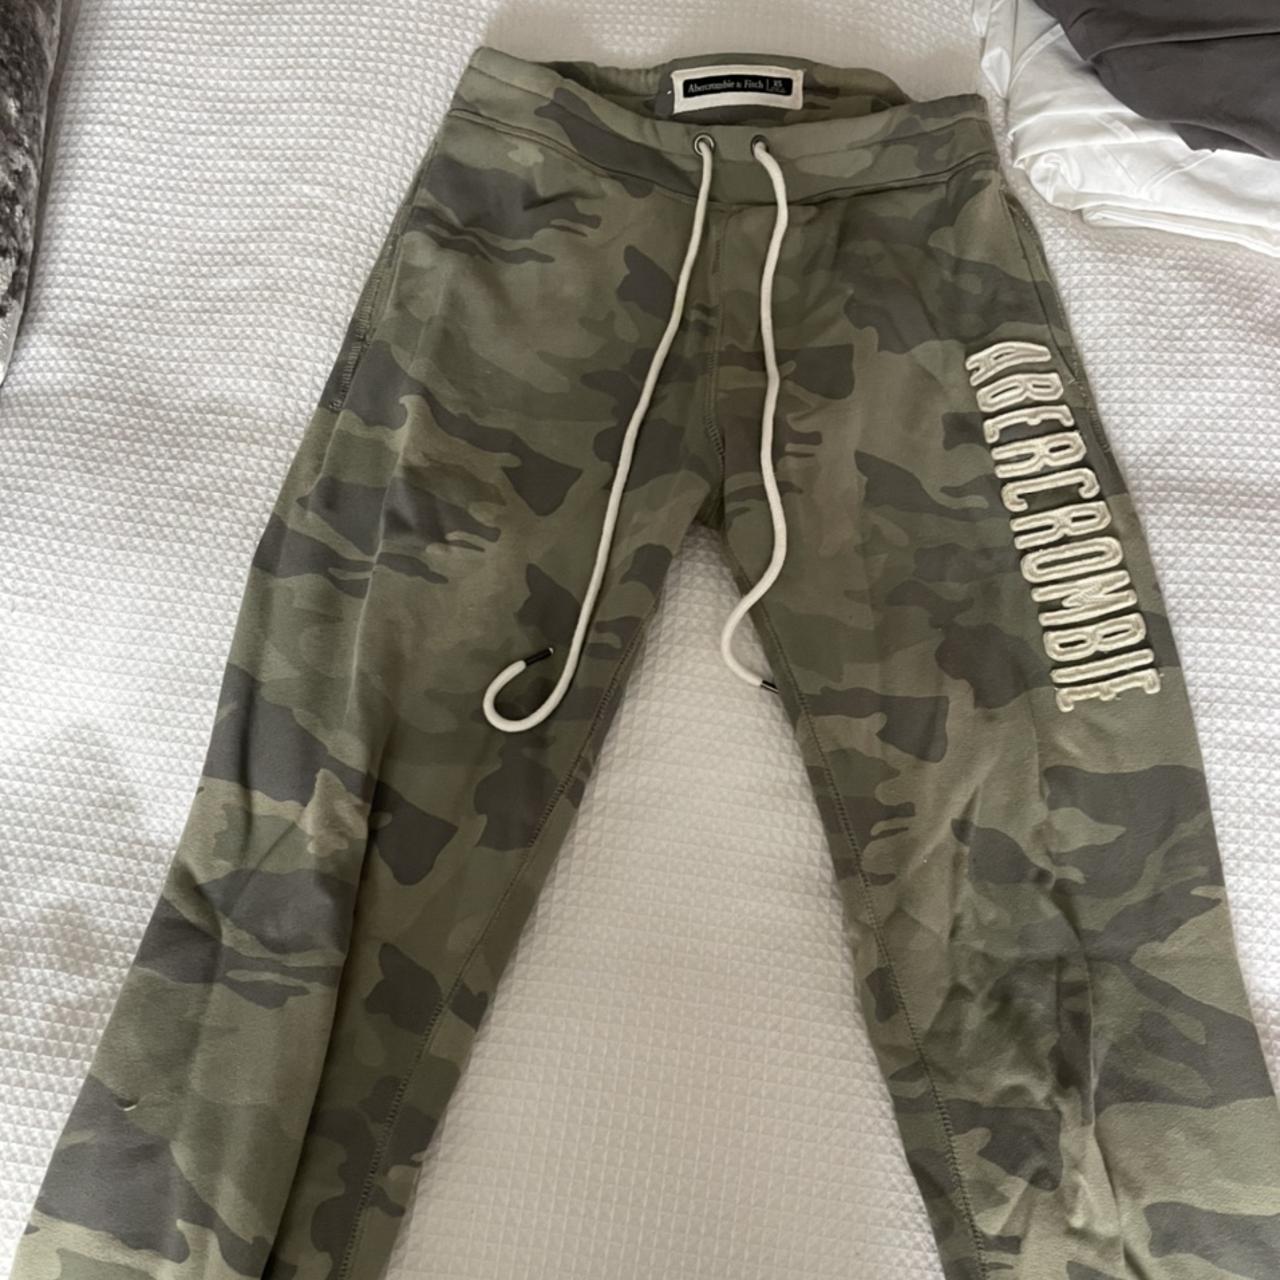 abercrombie joggers msg me if interested 🤍 - Depop